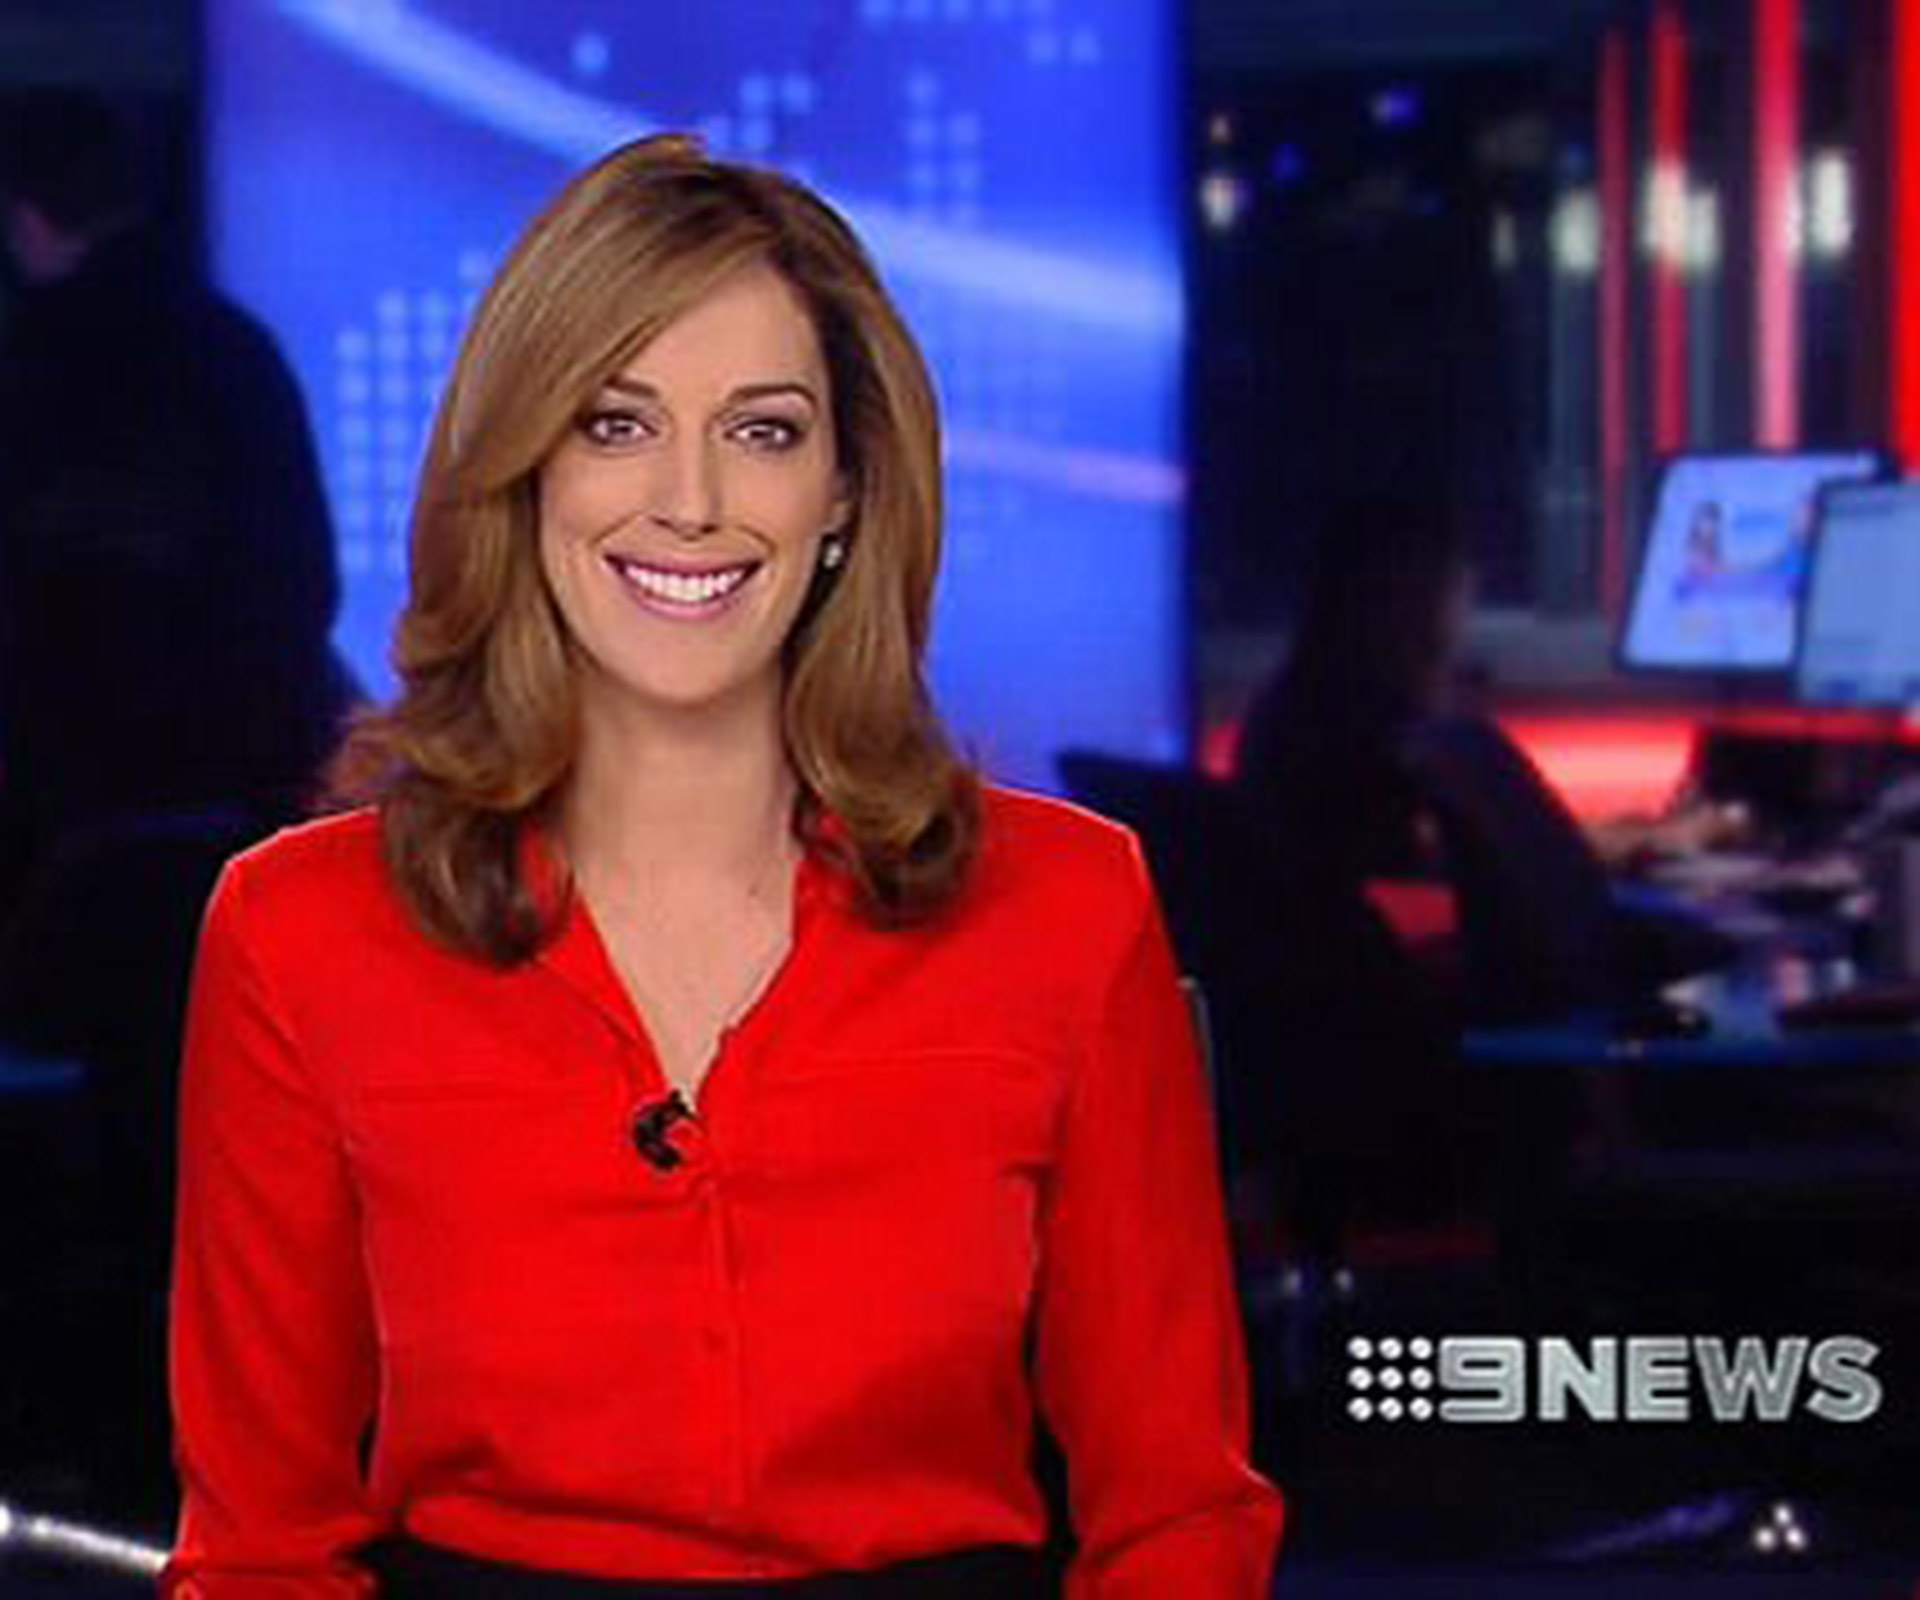 Channel Nine presenter says she’s been inundated with 200 creepy messages from obsessive fan